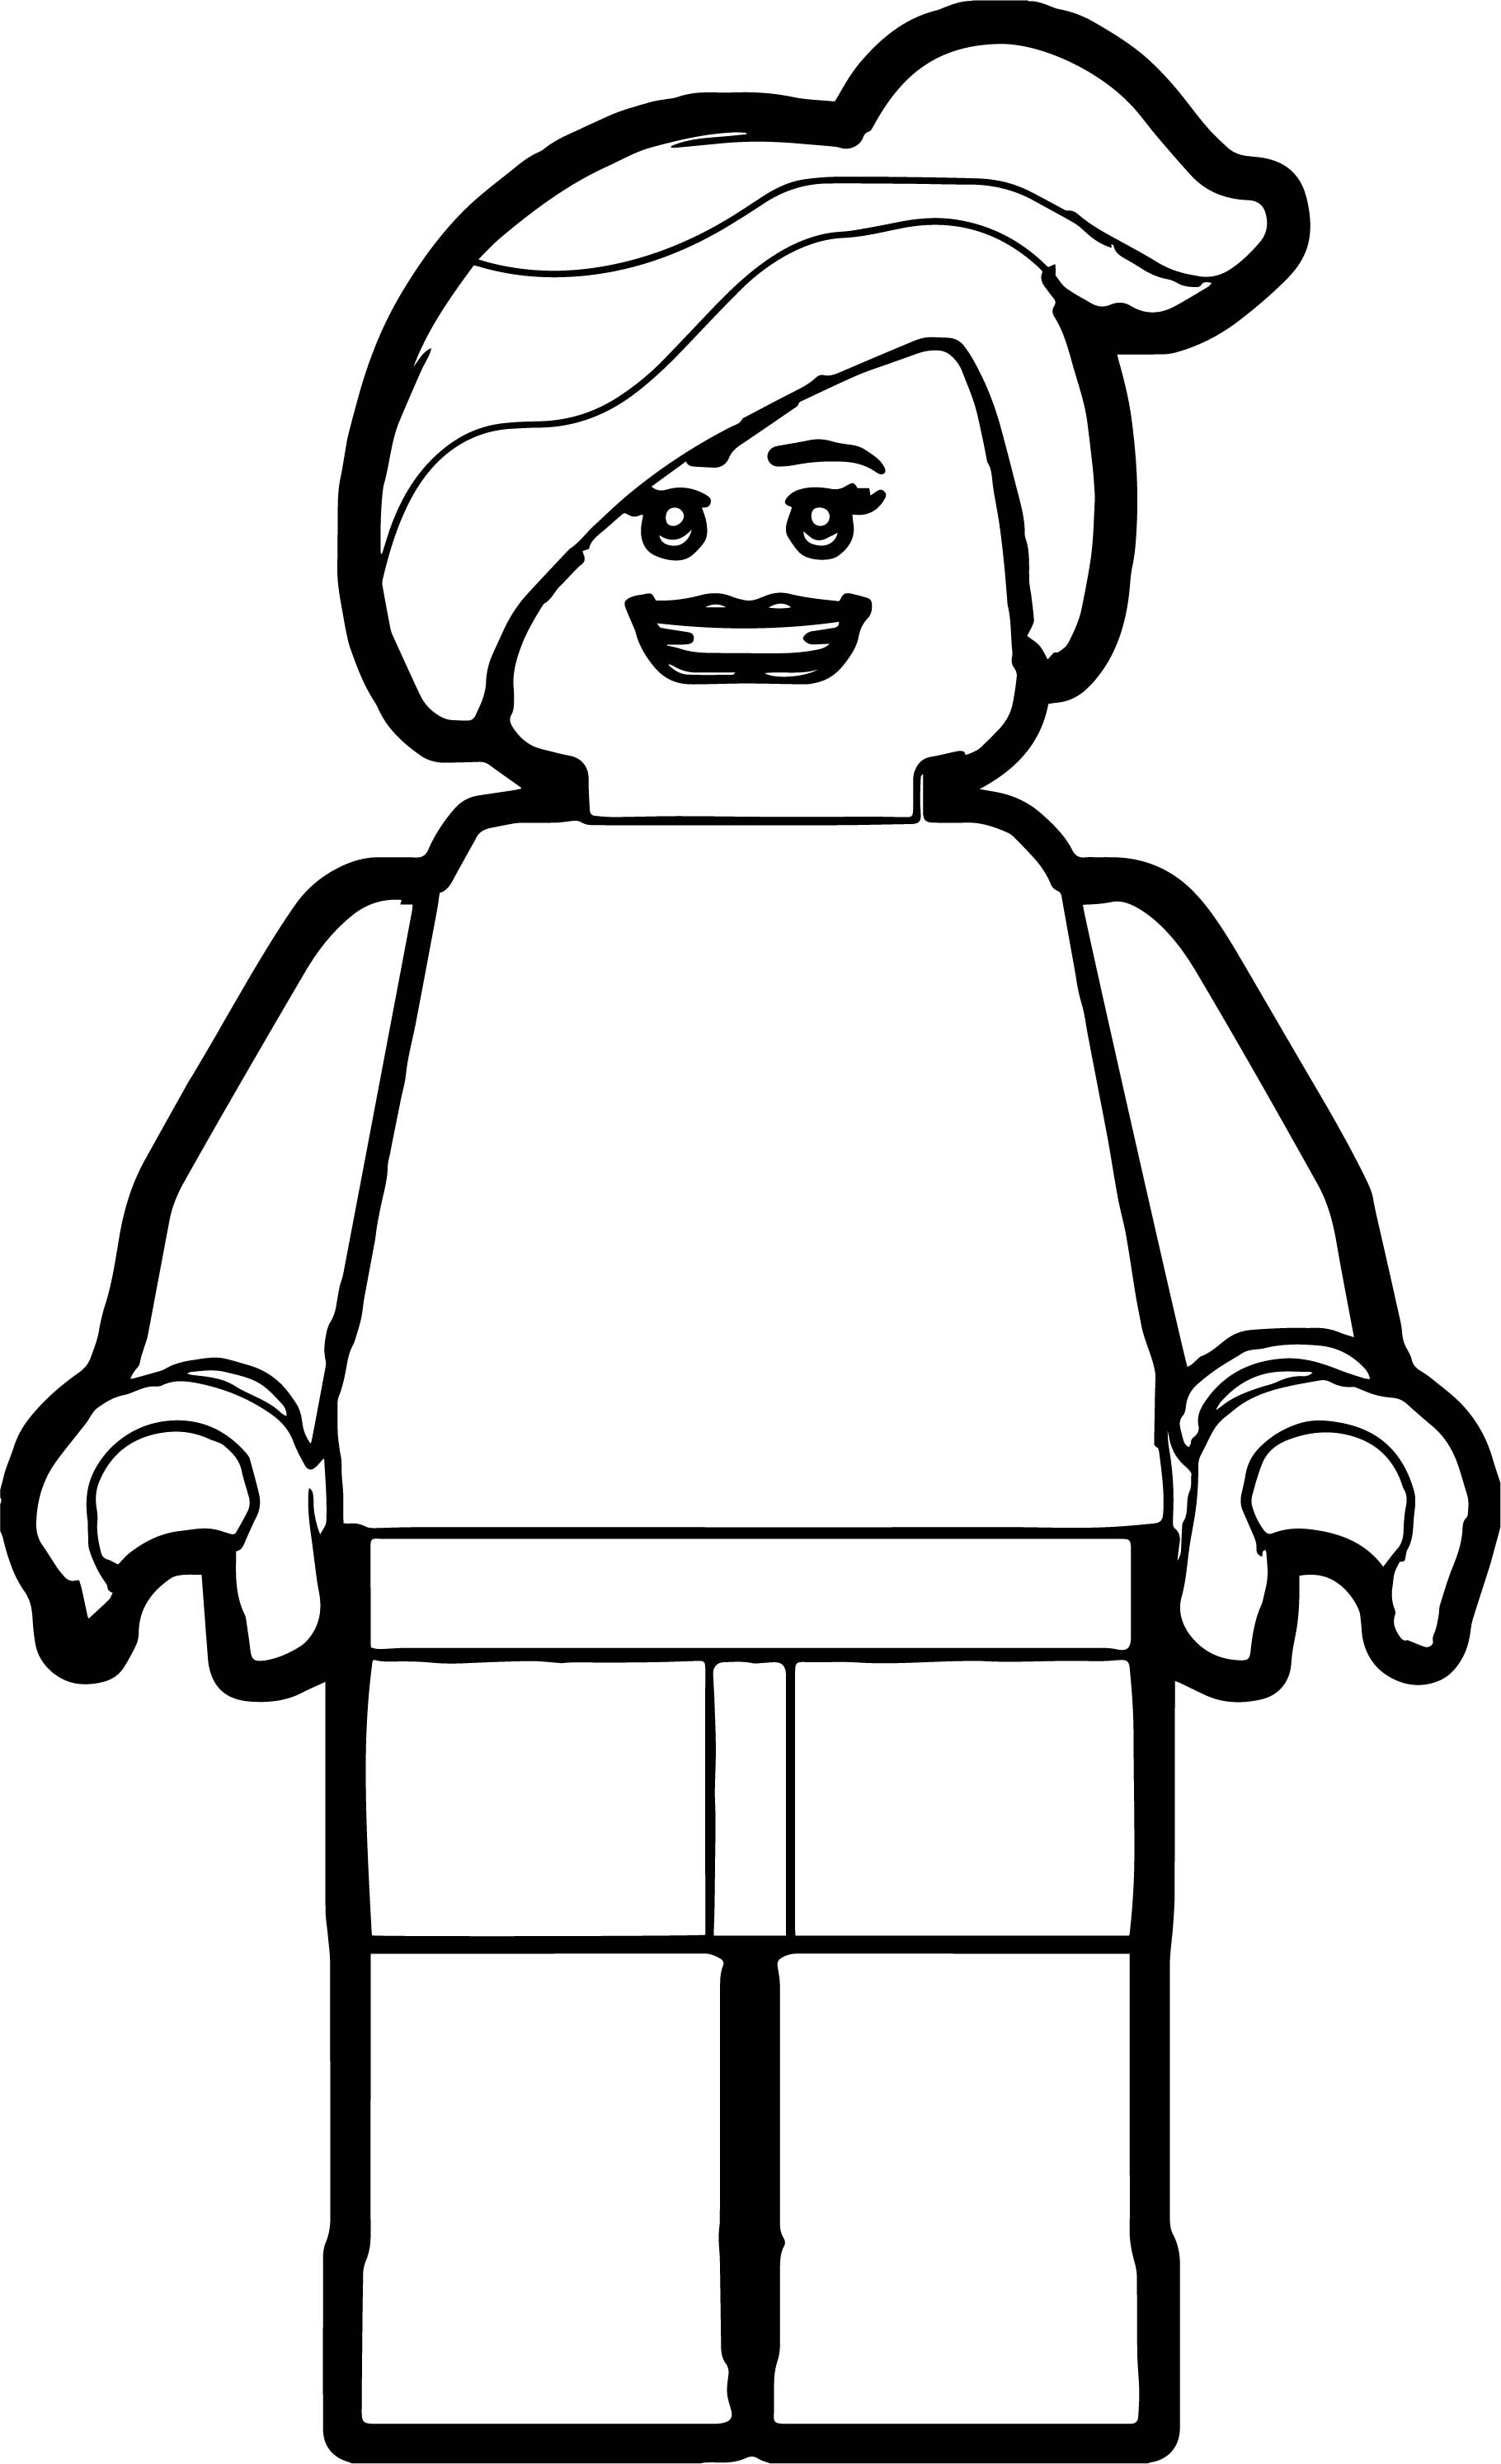 Girl Lego Coloring Pages
 Lego Woman Coloring Page